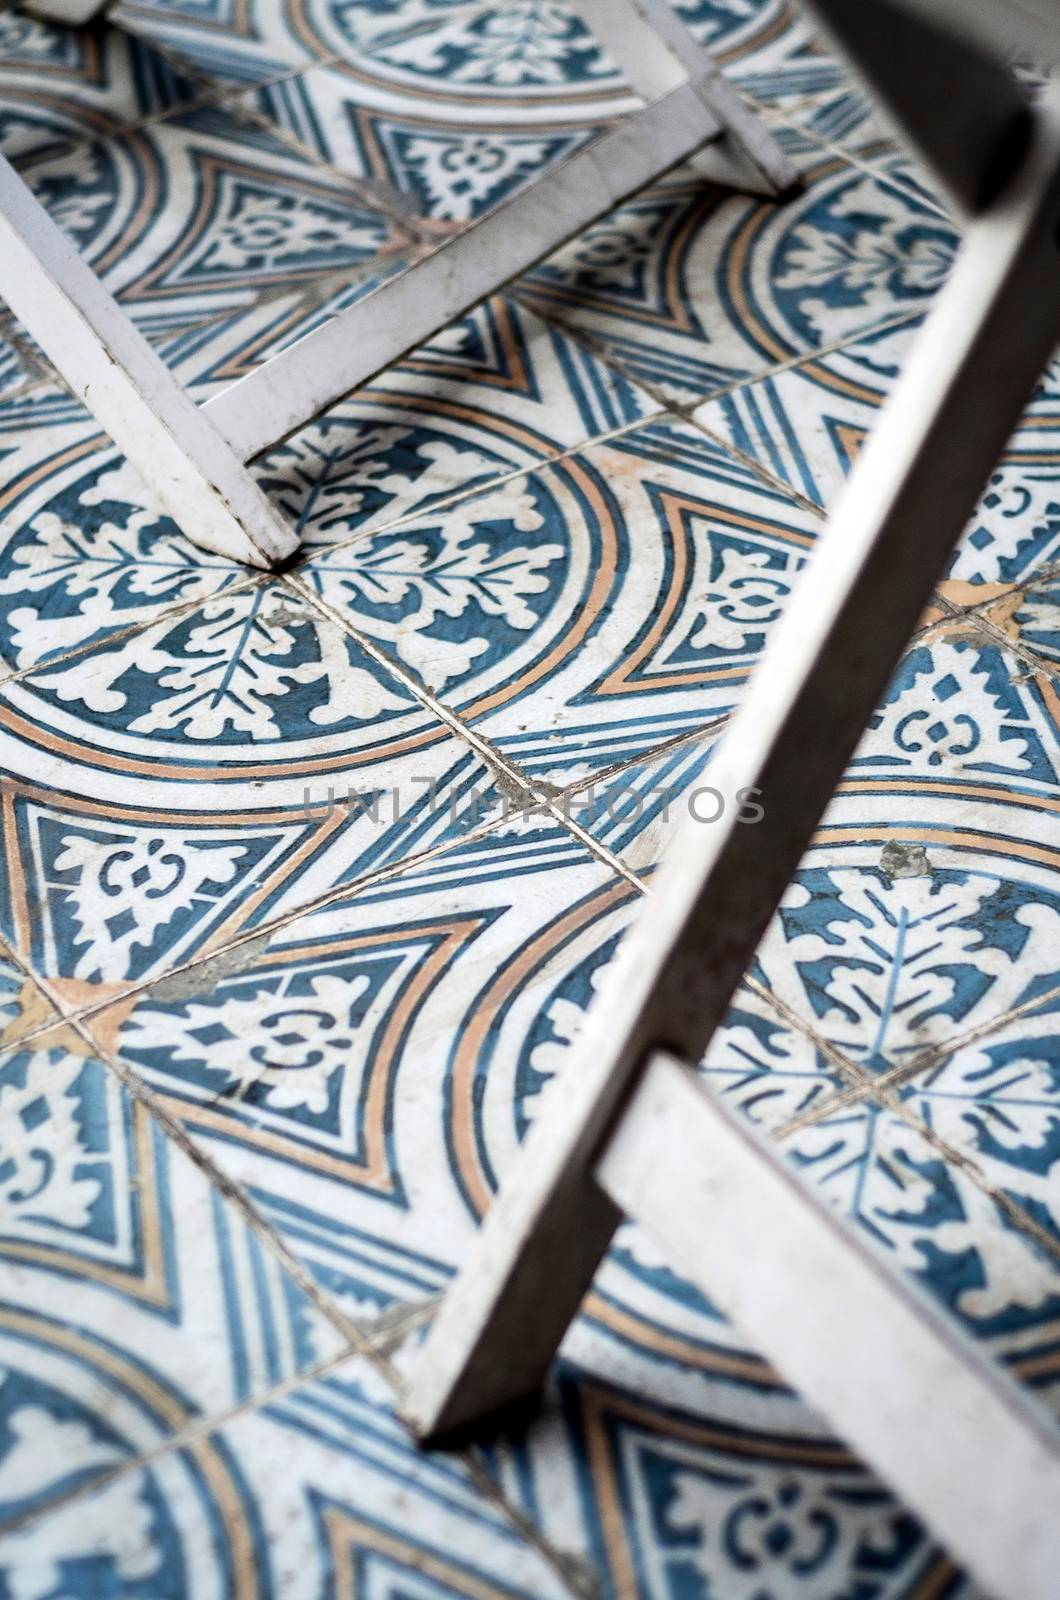 traditional design old rustic floor tiles detail in seville andalucia cafe